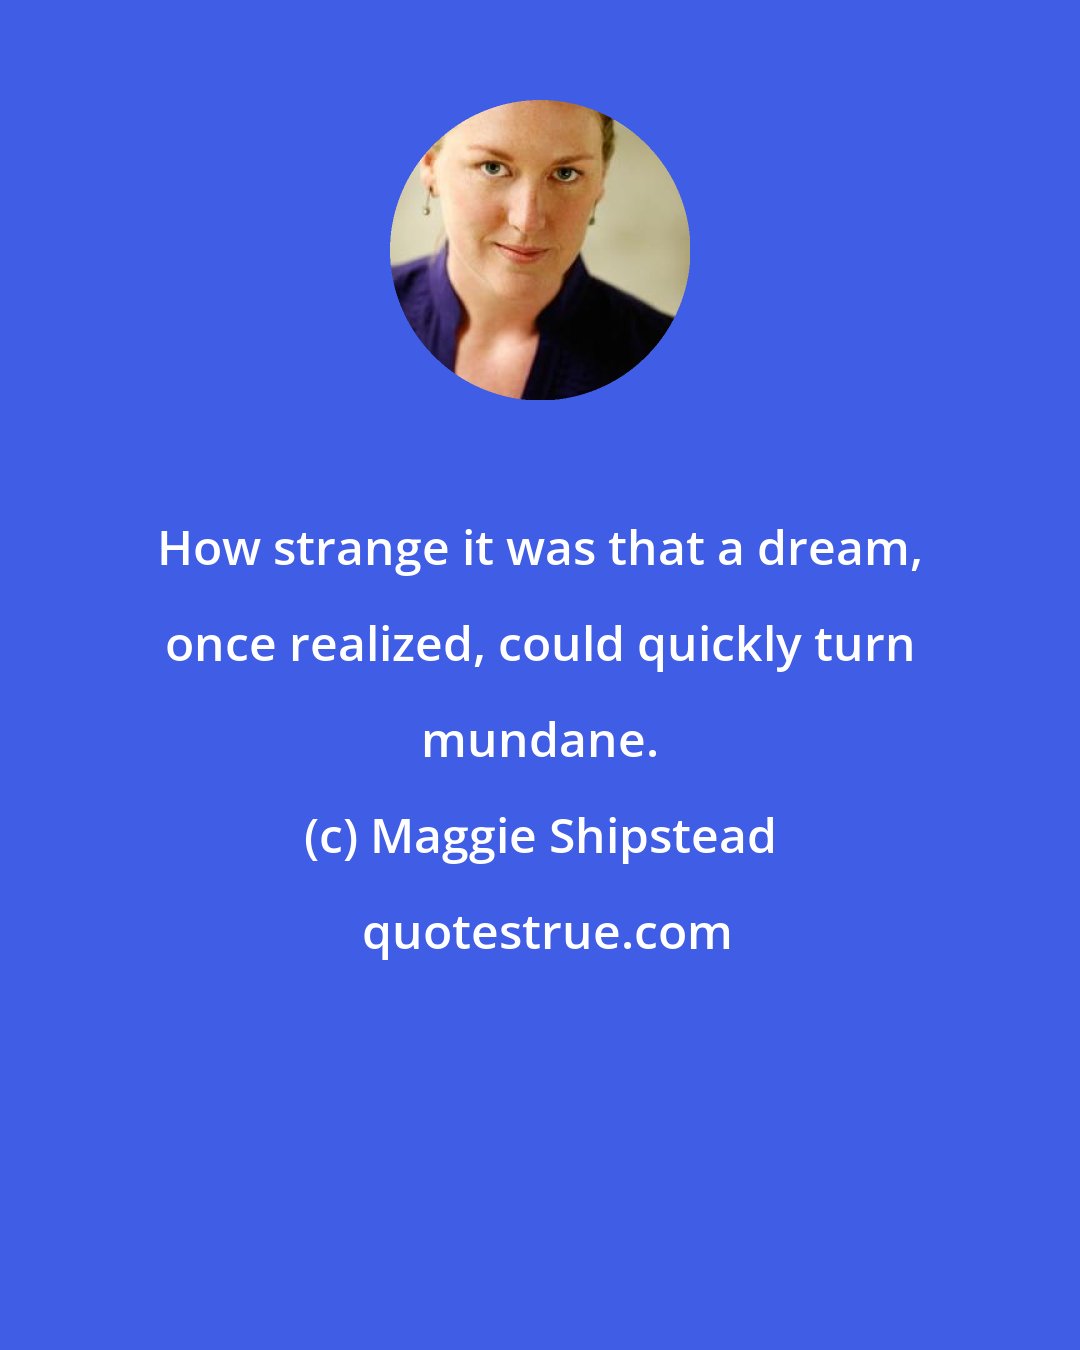 Maggie Shipstead: How strange it was that a dream, once realized, could quickly turn mundane.